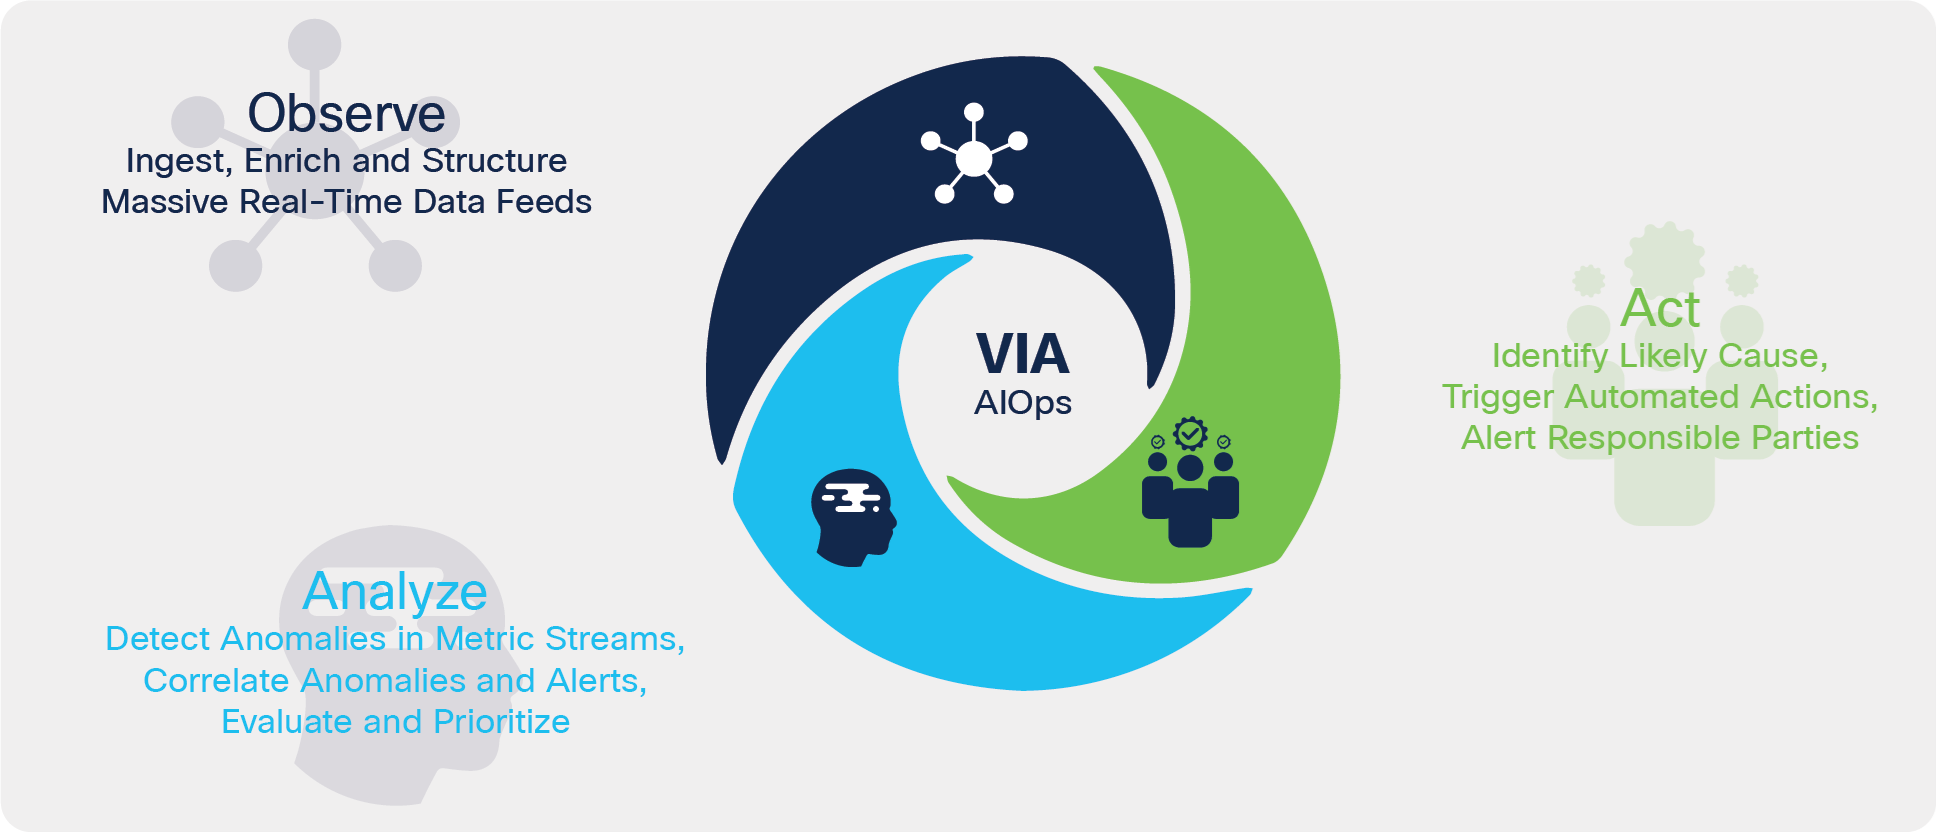 VIA AIOps operates through the entire event pipeline from observation to analysis and action to reduce the time to diagnose and resolve issues faster through automation